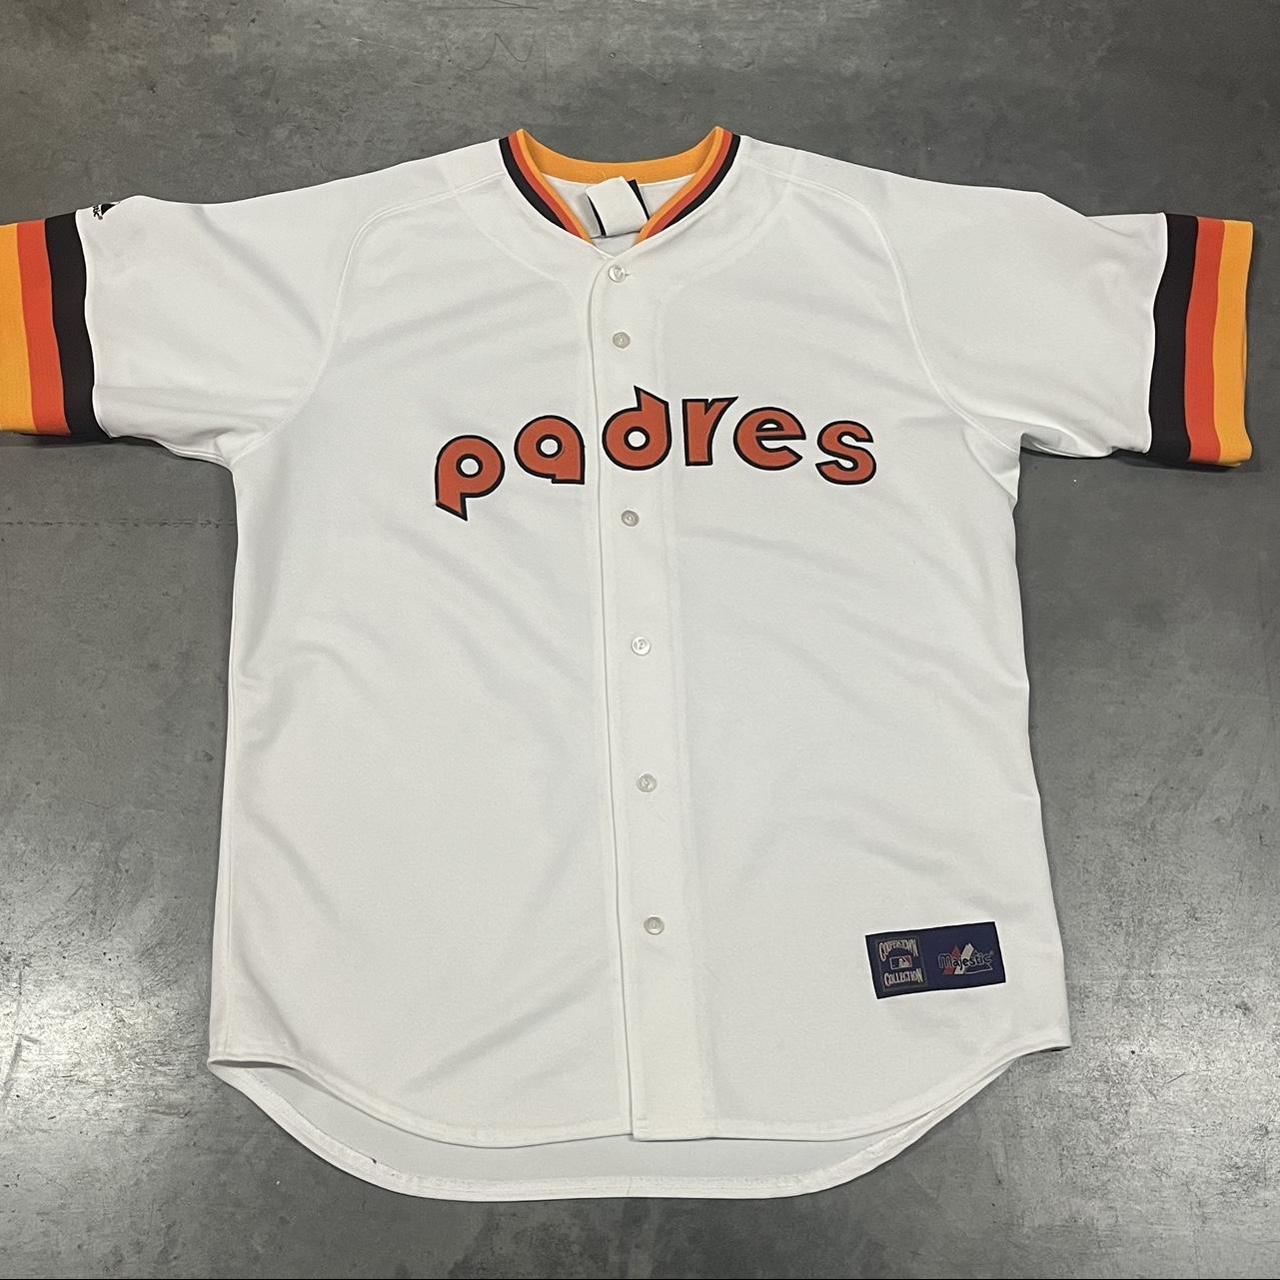 San Diego Padres Basketball jersey. This piece is a - Depop